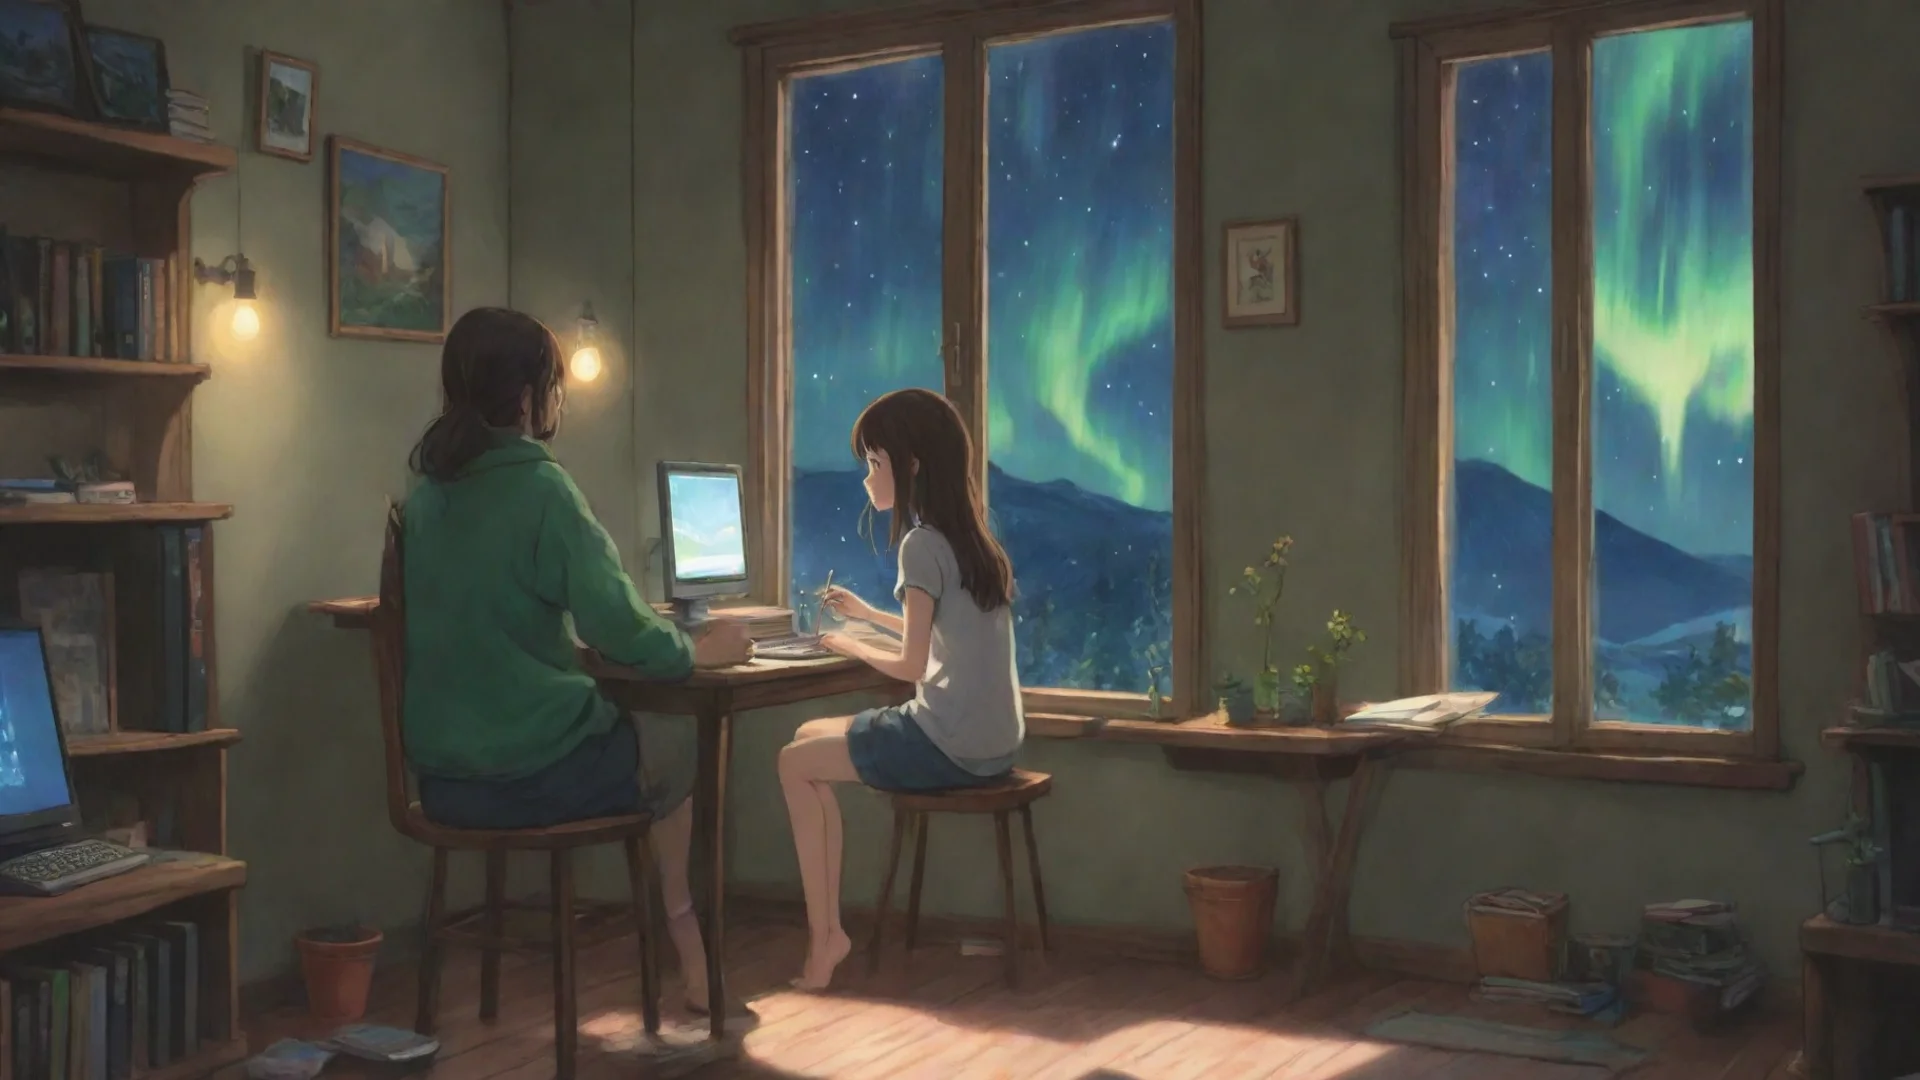 trending can you draw of a girl sitting on a chair and using a computer inside of his house and the window is like northern lights in studio ghibli art style good looking fantastic 1